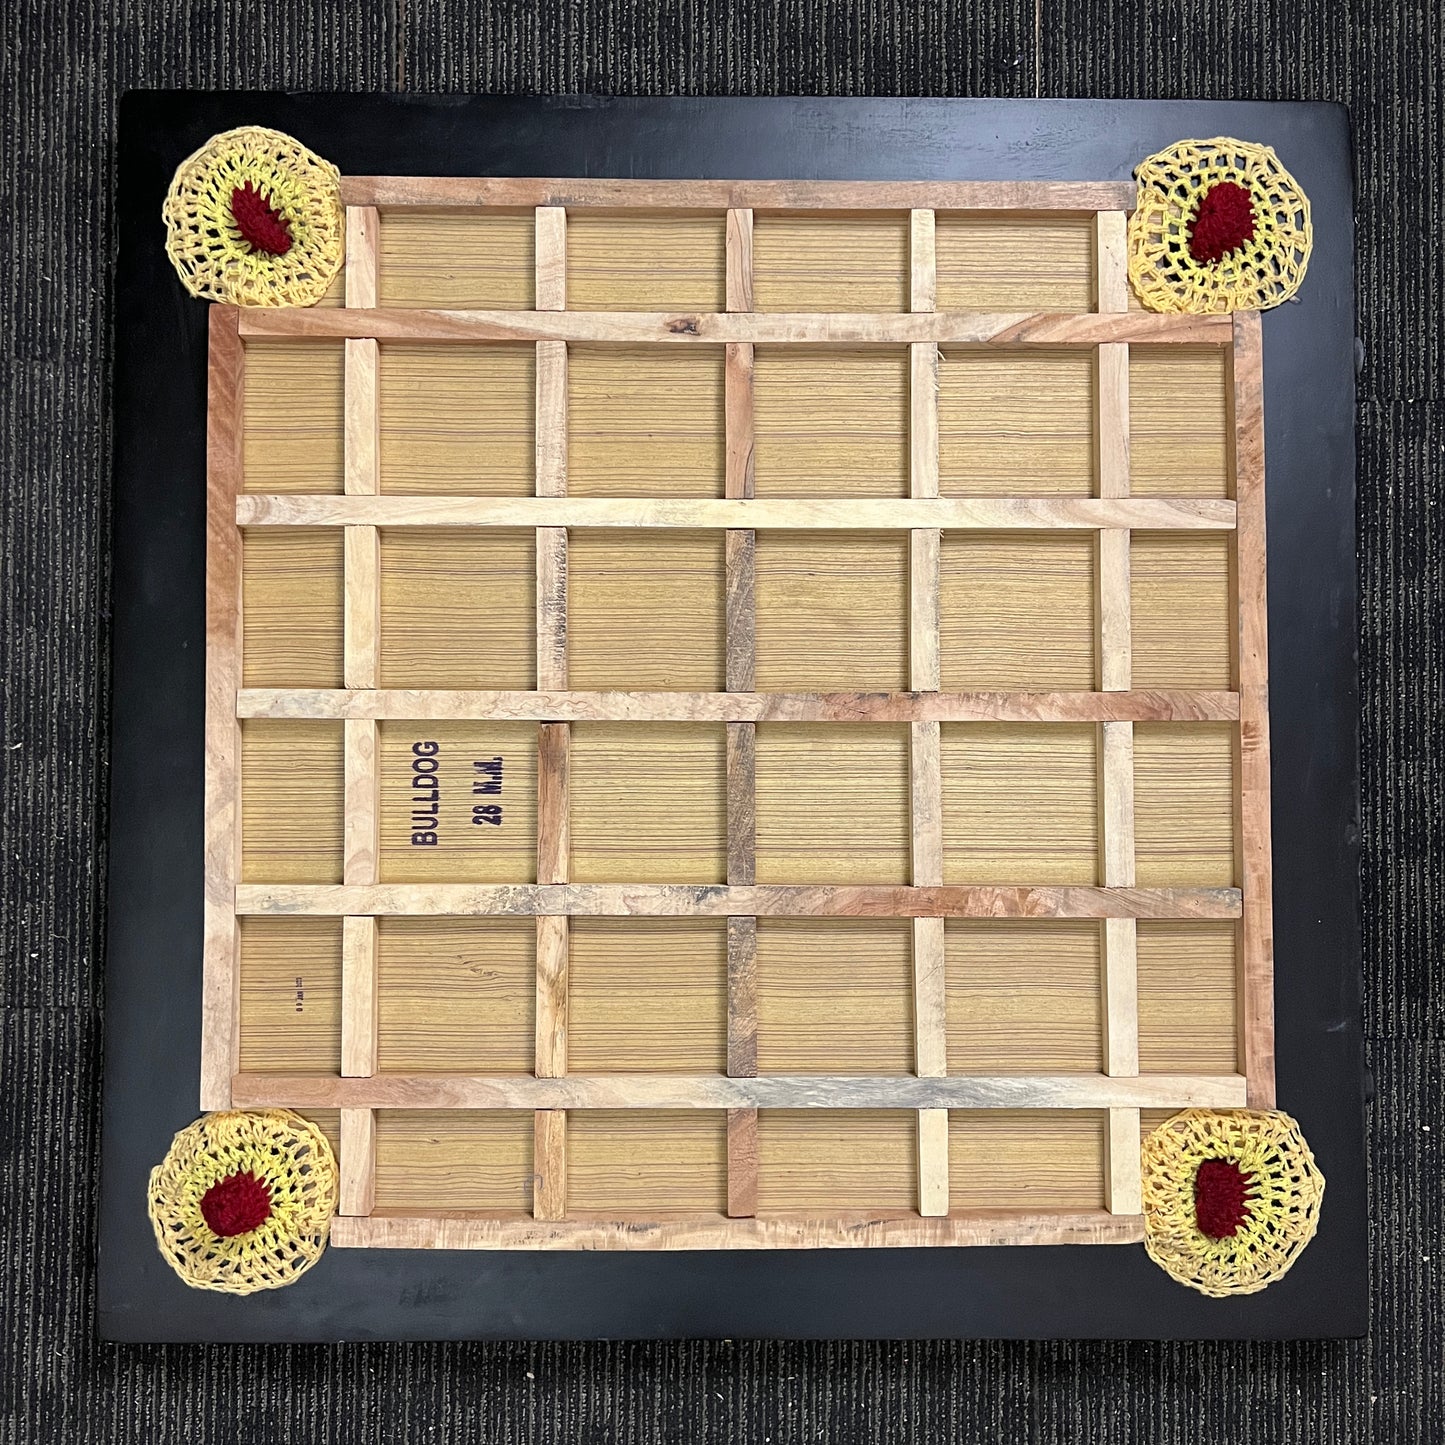 Precise Bulldog Elegant carrom board, 28mm thick English Birchwood ply, 37x37 inches overall size with a 29x29 inch playing area and 4-inch borders. Comes with a striker and a set of coins, known for its super satin smooth tournament playing surface.